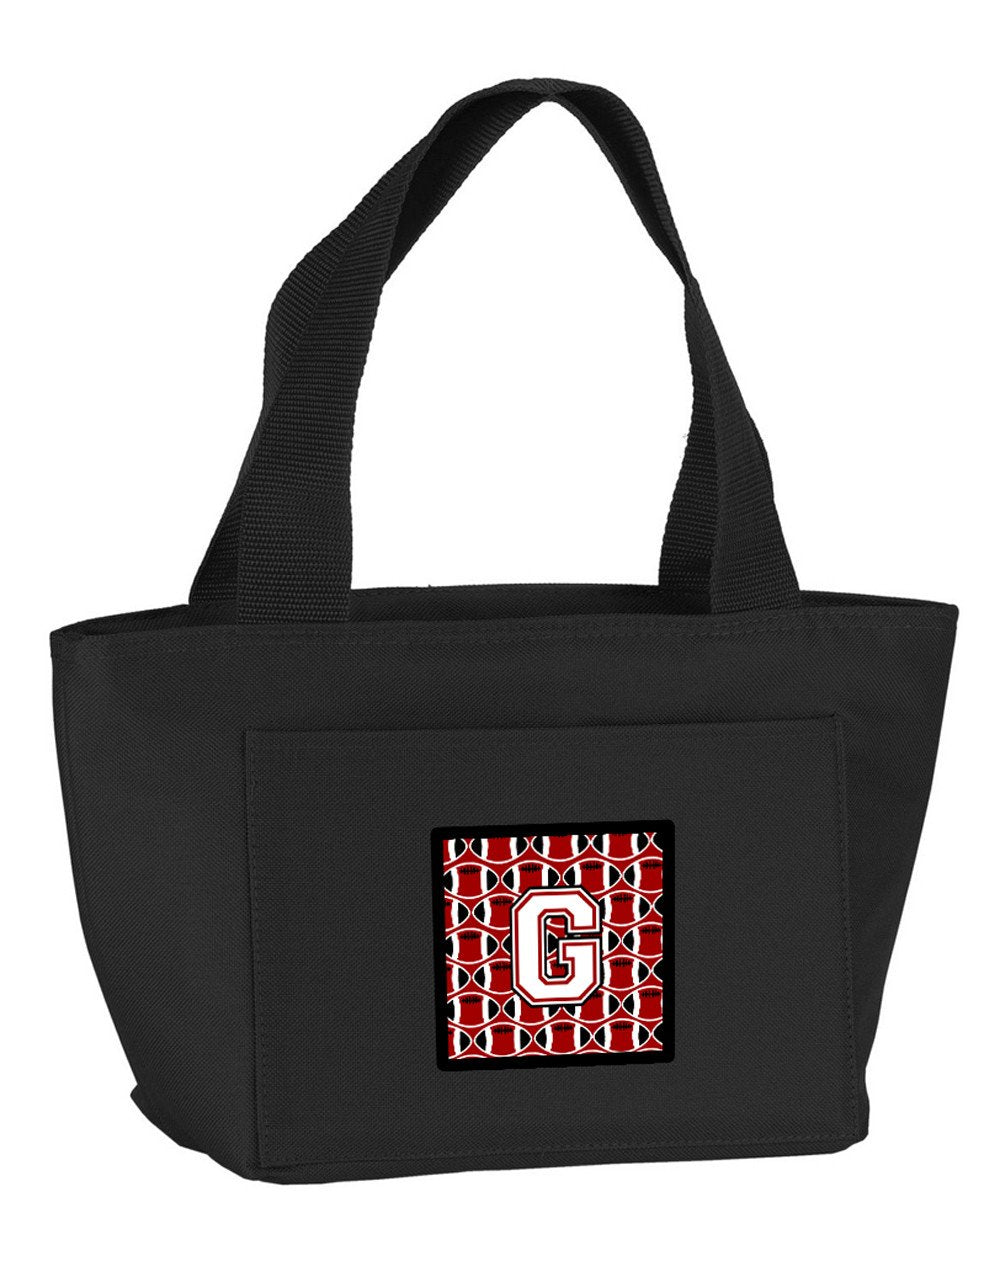 Letter G Football Cardinal and White Lunch Bag CJ1082-GBK-8808 by Caroline's Treasures